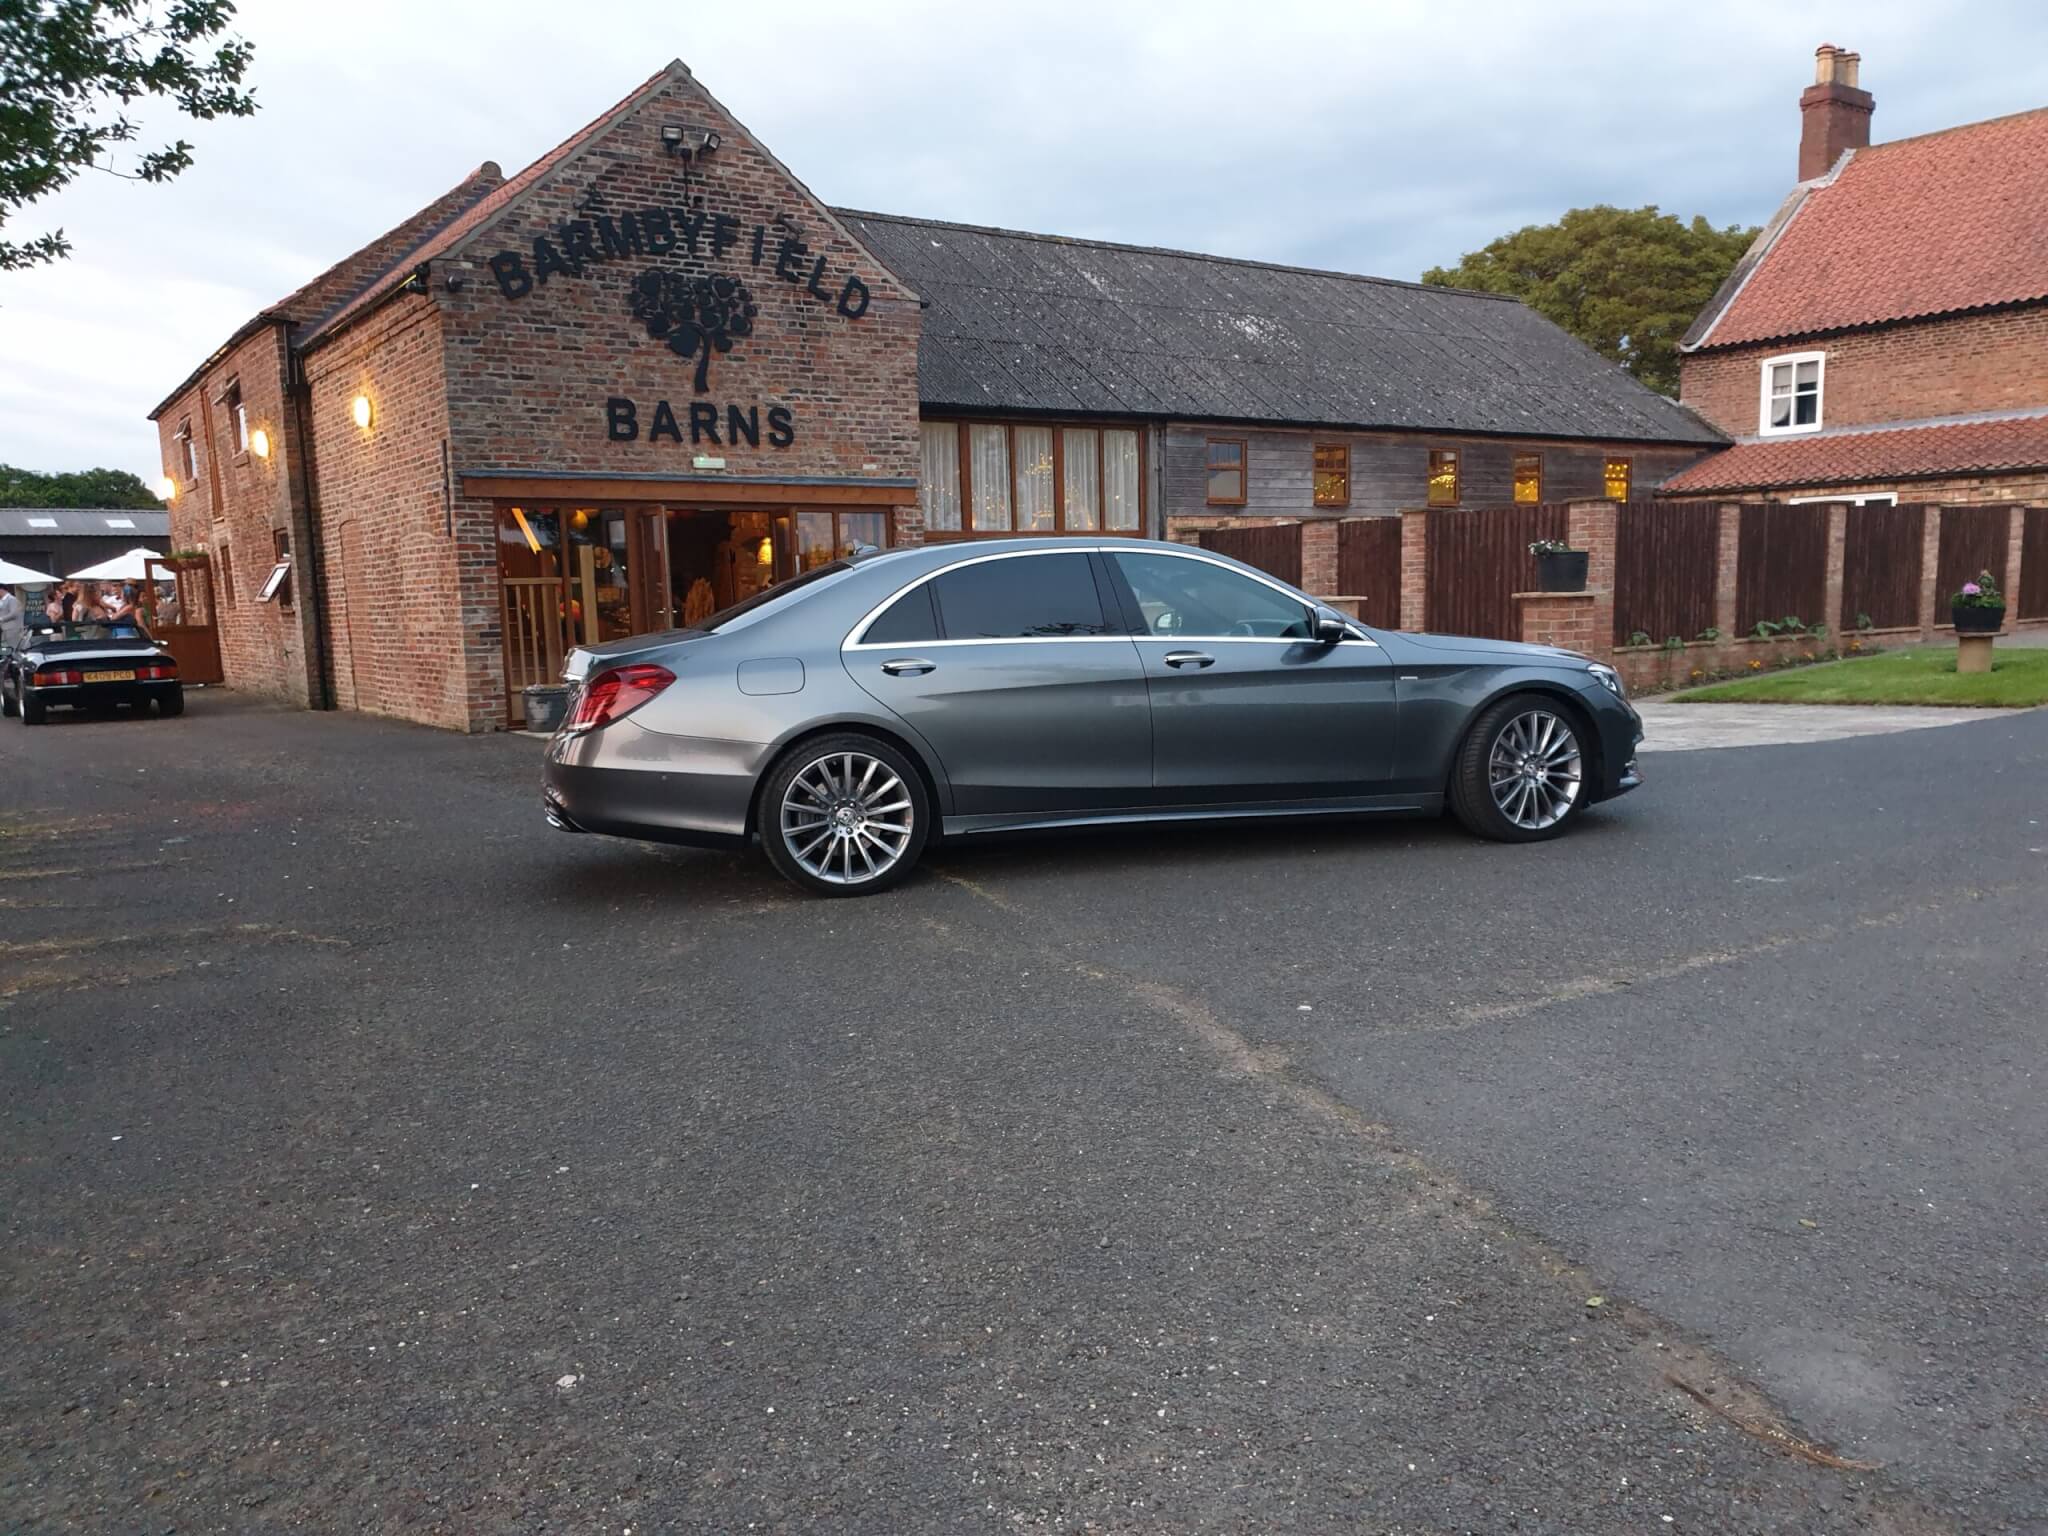 Our Mercedes s class at Barbyfields Barn